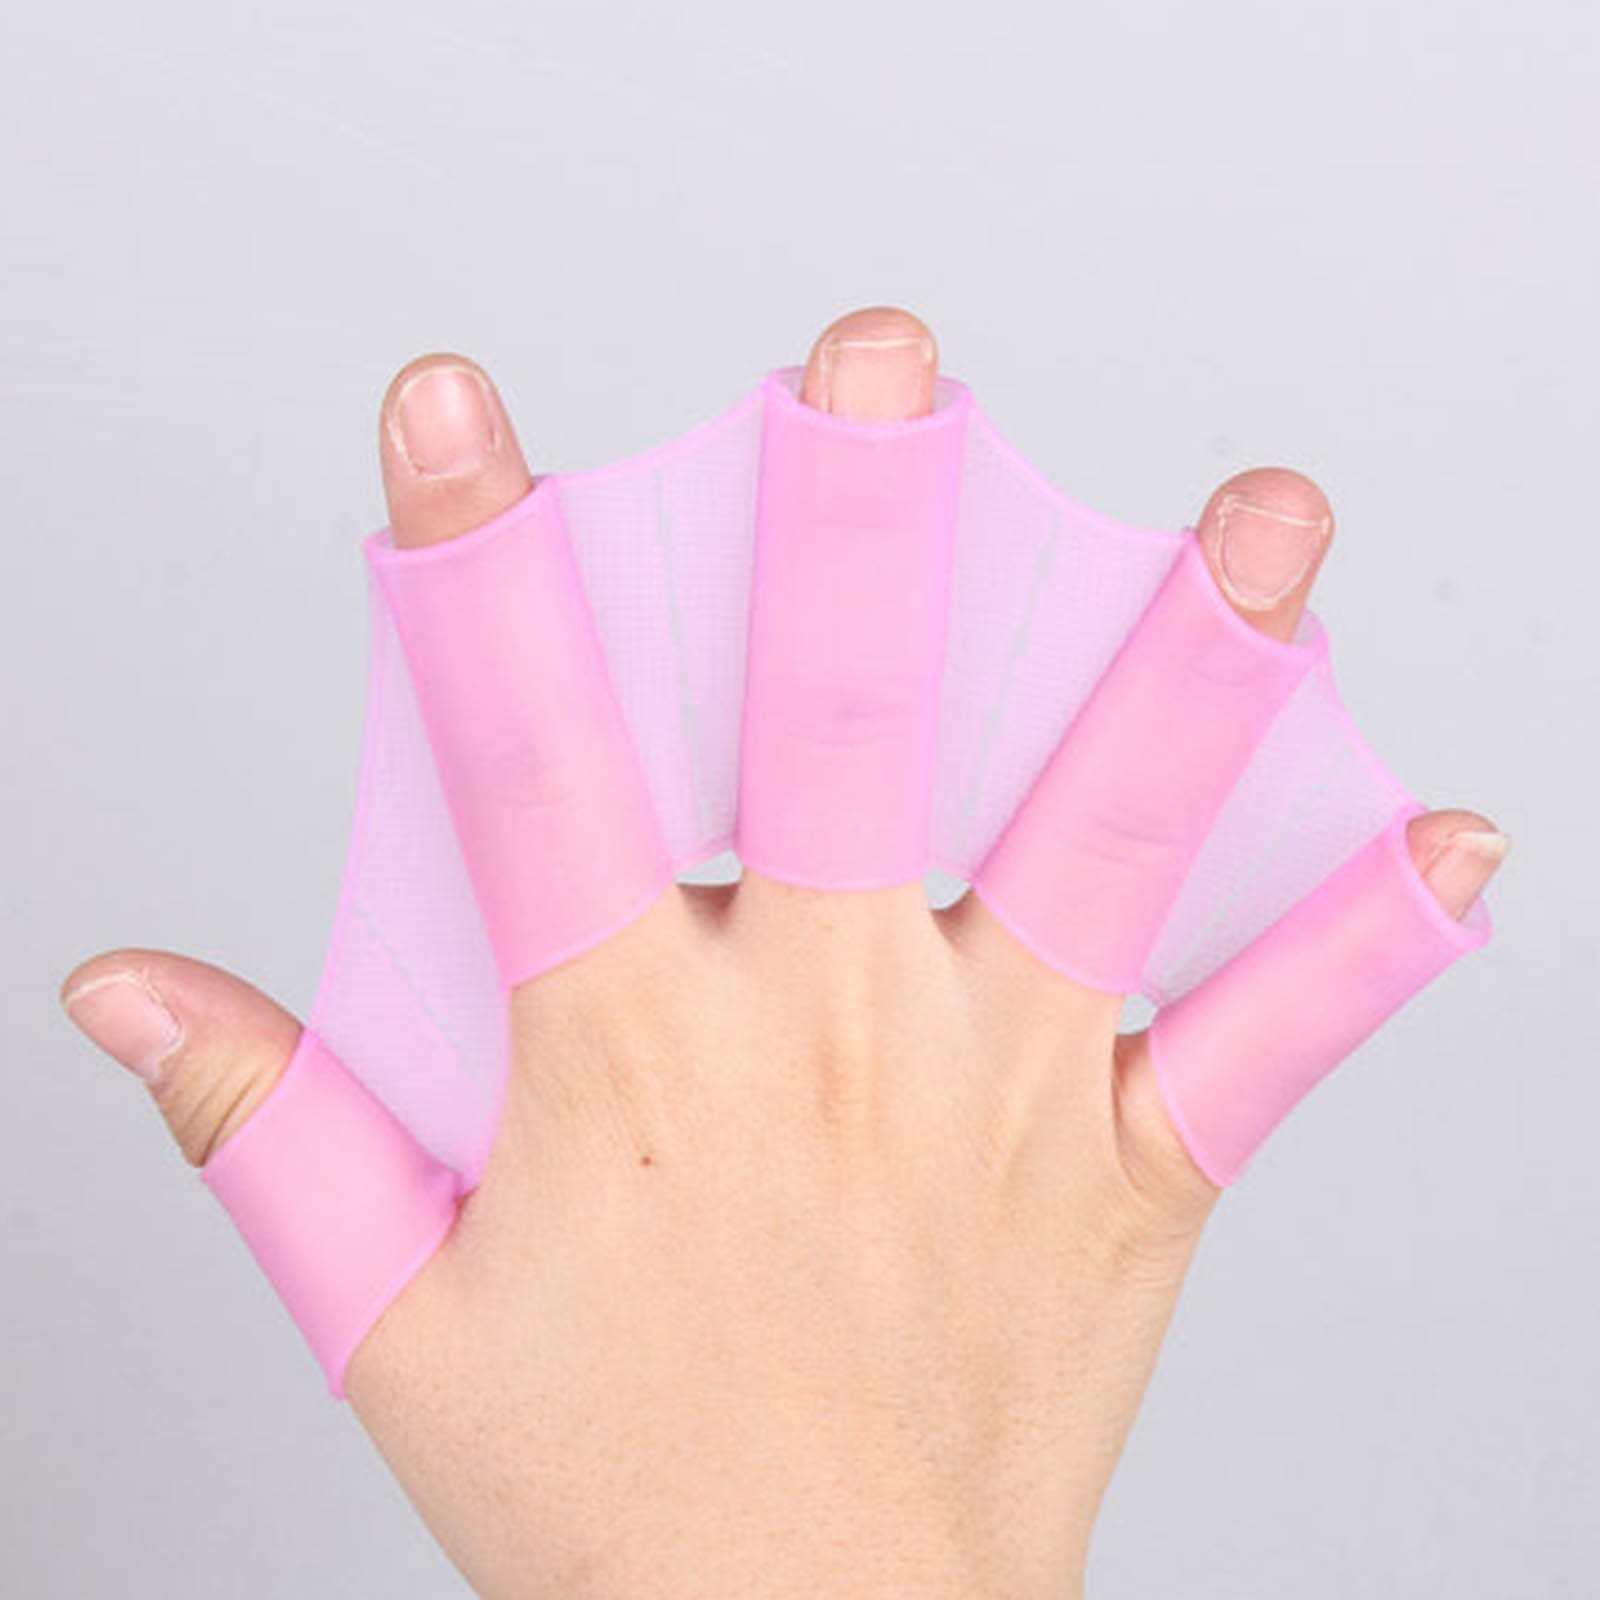 HACHUM Silicone Hand Swimming Fins Flippers Swim Finger Webbed Gloves ...